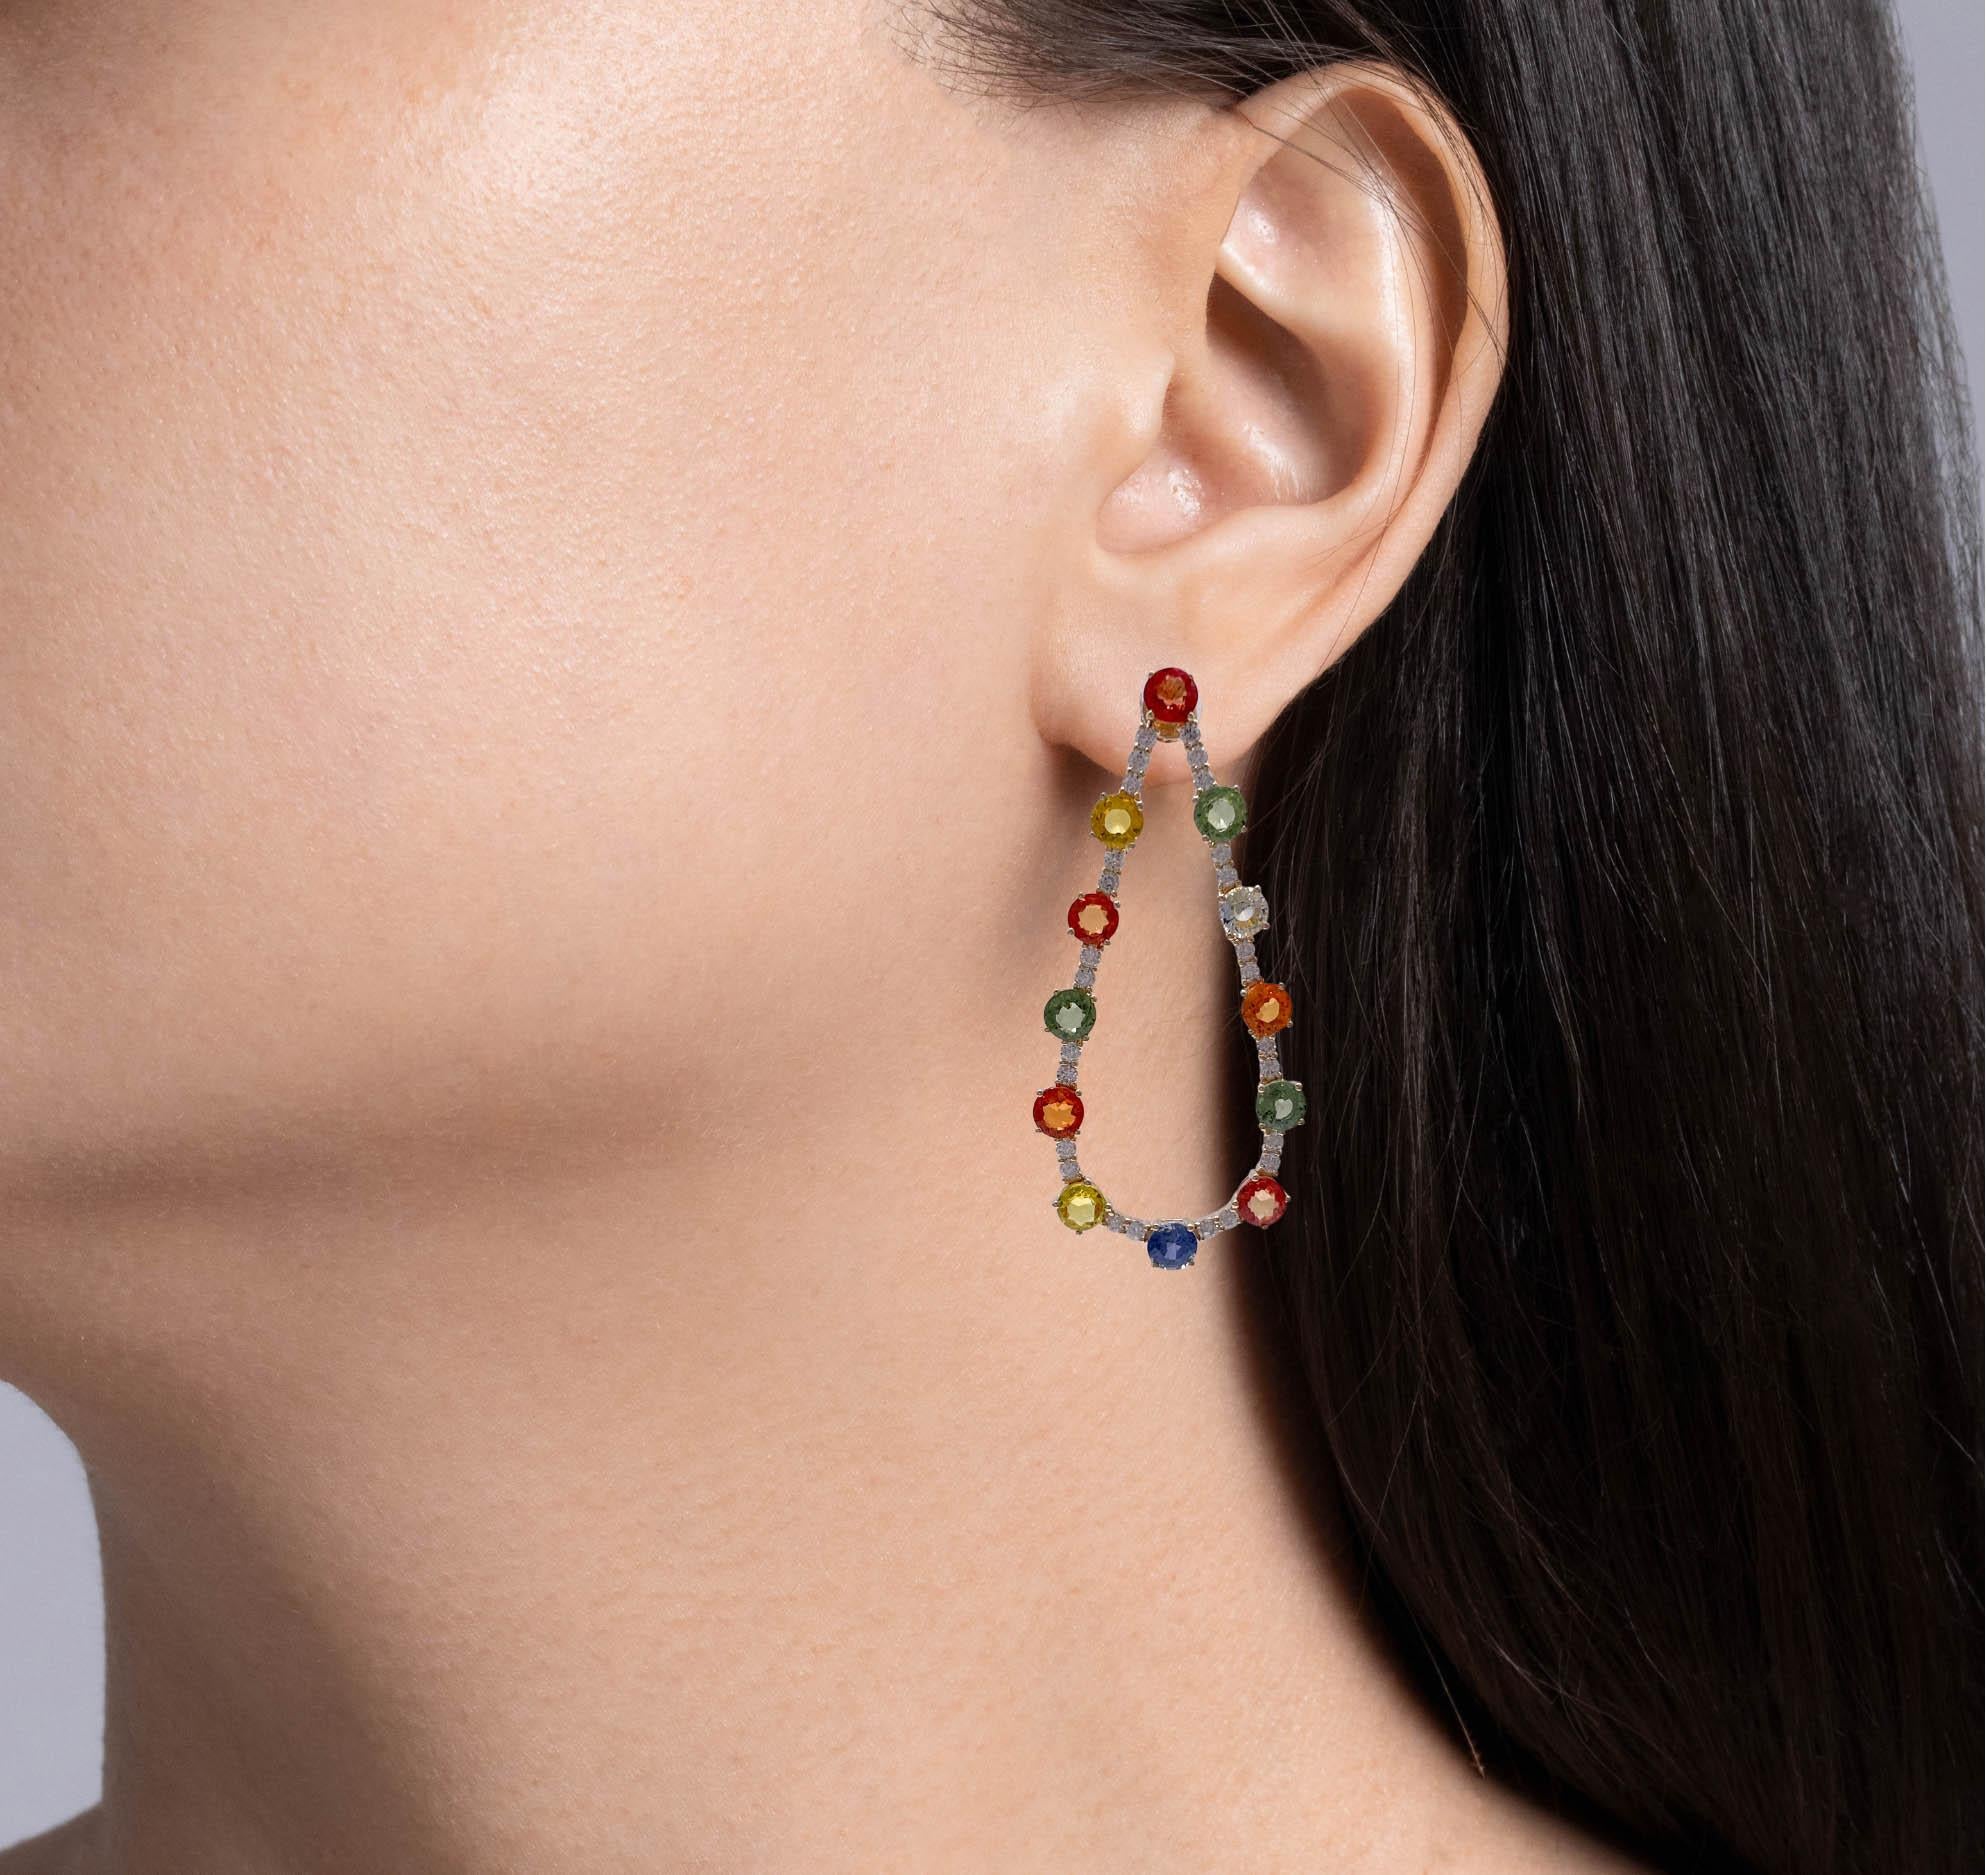 Jay Feder 14k Yellow Gold Multi Sapphire and Diamond Teardrop Shaped Earrings

Set with 24 round multicolored sapphires (13.16ctw) and 52 round brilliant diamonds (1.61ctw). 

The width tapers from 4.75mm to 24.95mm on the bottom. Earrings are 2